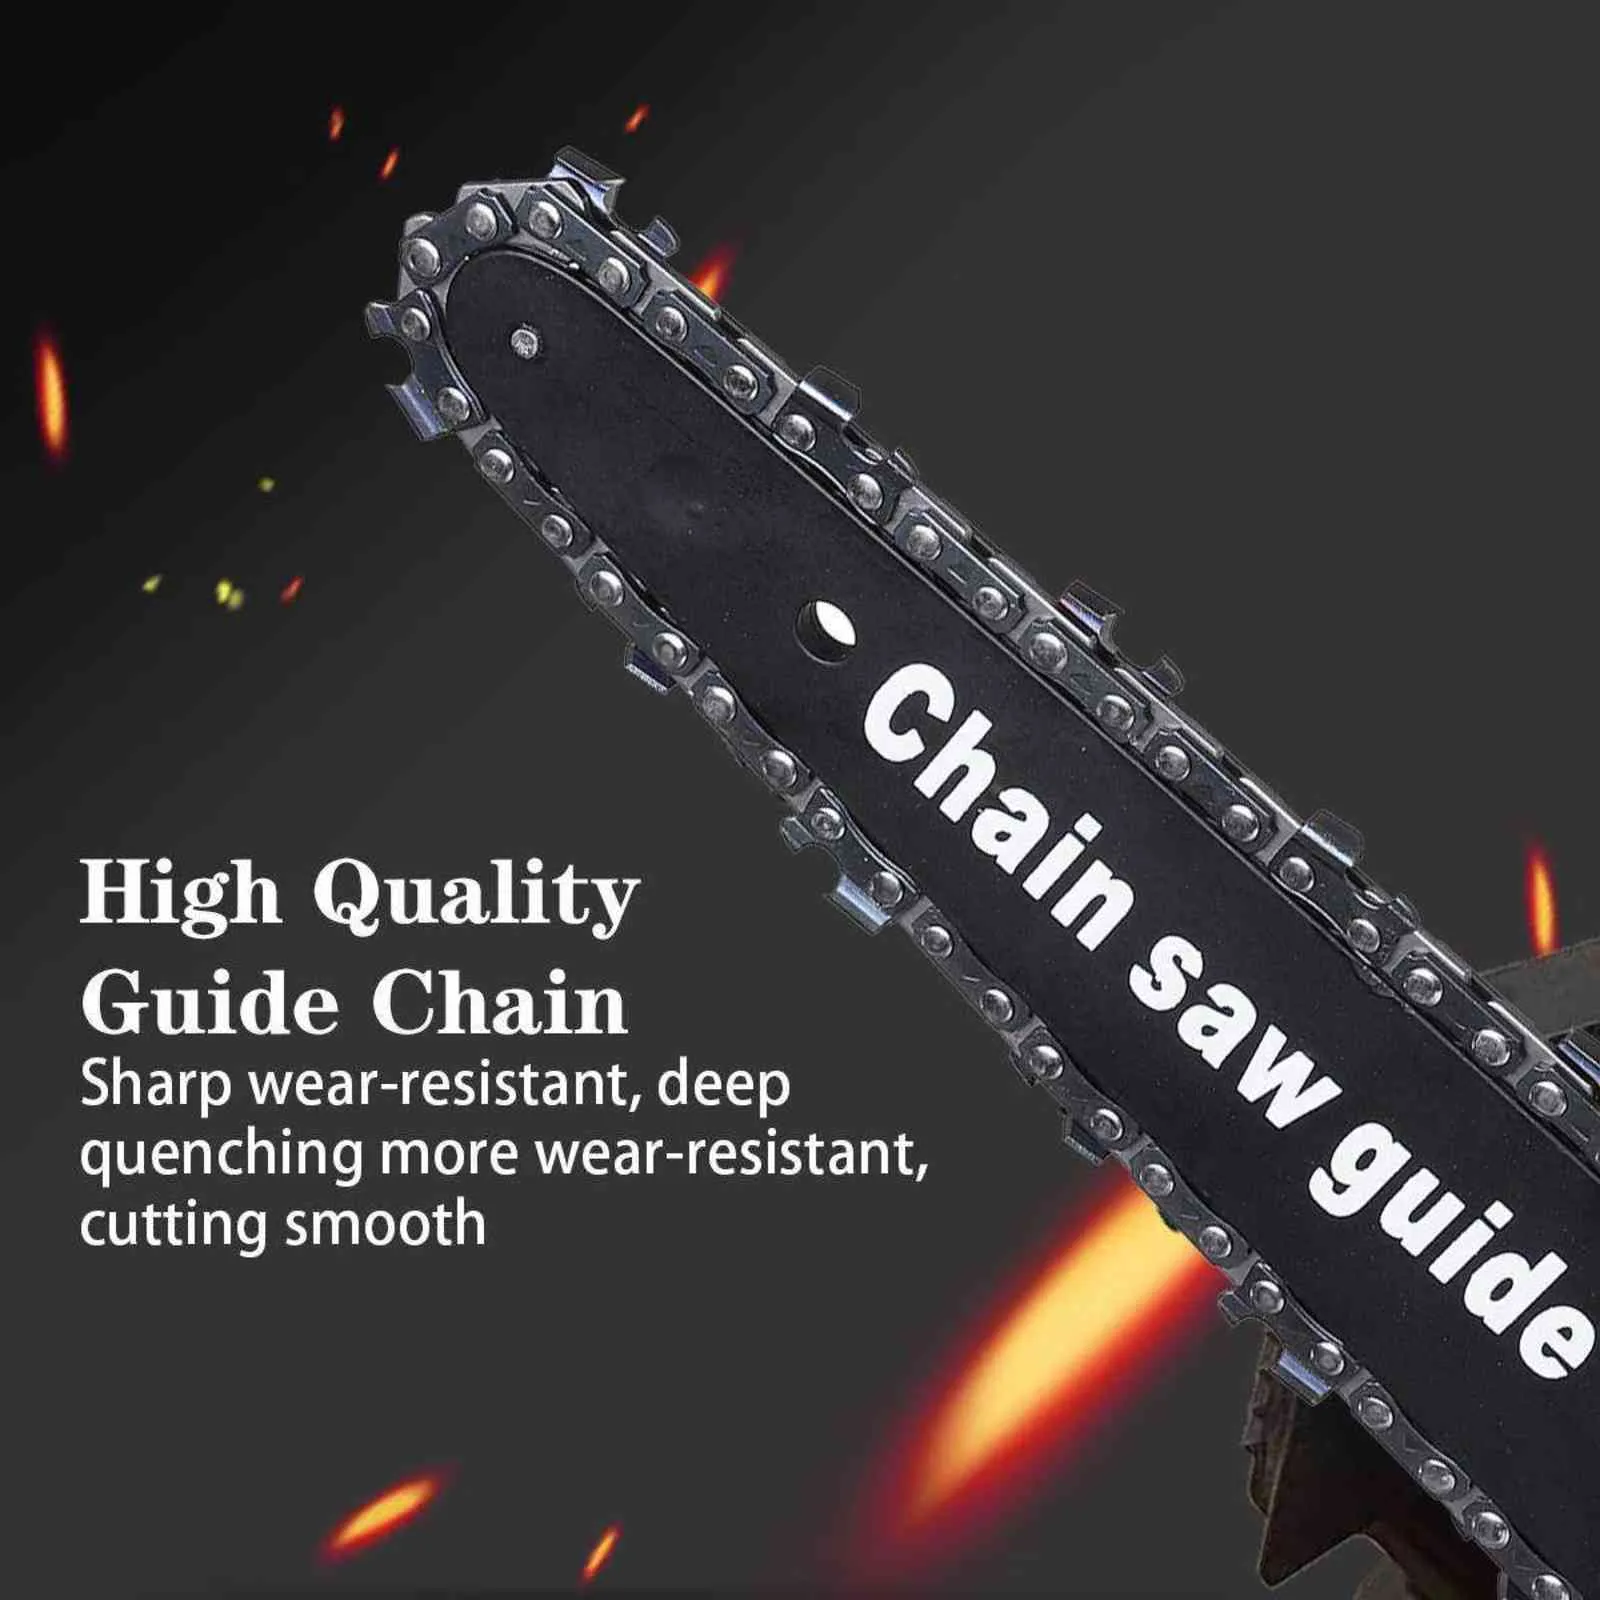 6 Inch 3000W Electric Chain Saw Pruning ChainSaw Cordless Garden Tree Logging Trimming Saw Woodworking Cutter Tool Kits 211029